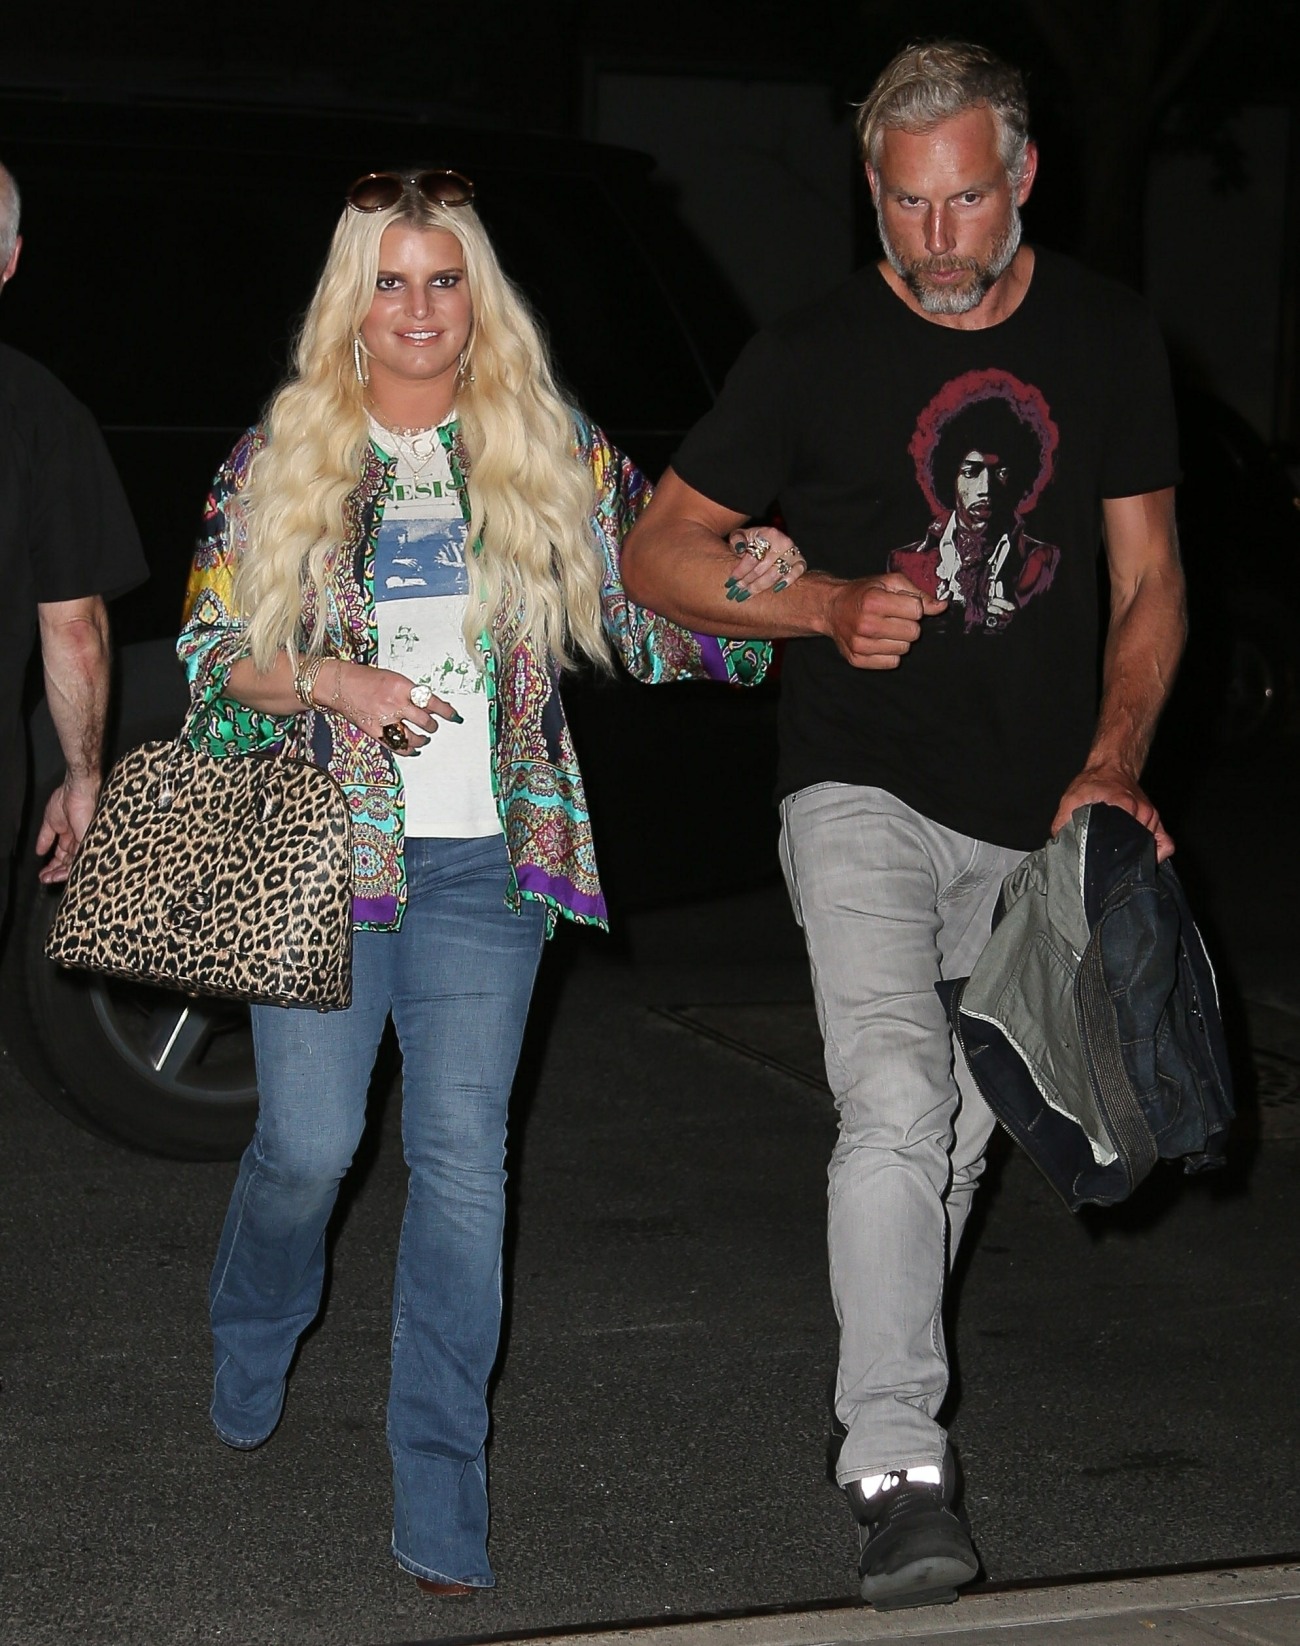 Jessica Simpson and Eric Johnson head back to their hotel after a night out in NYC